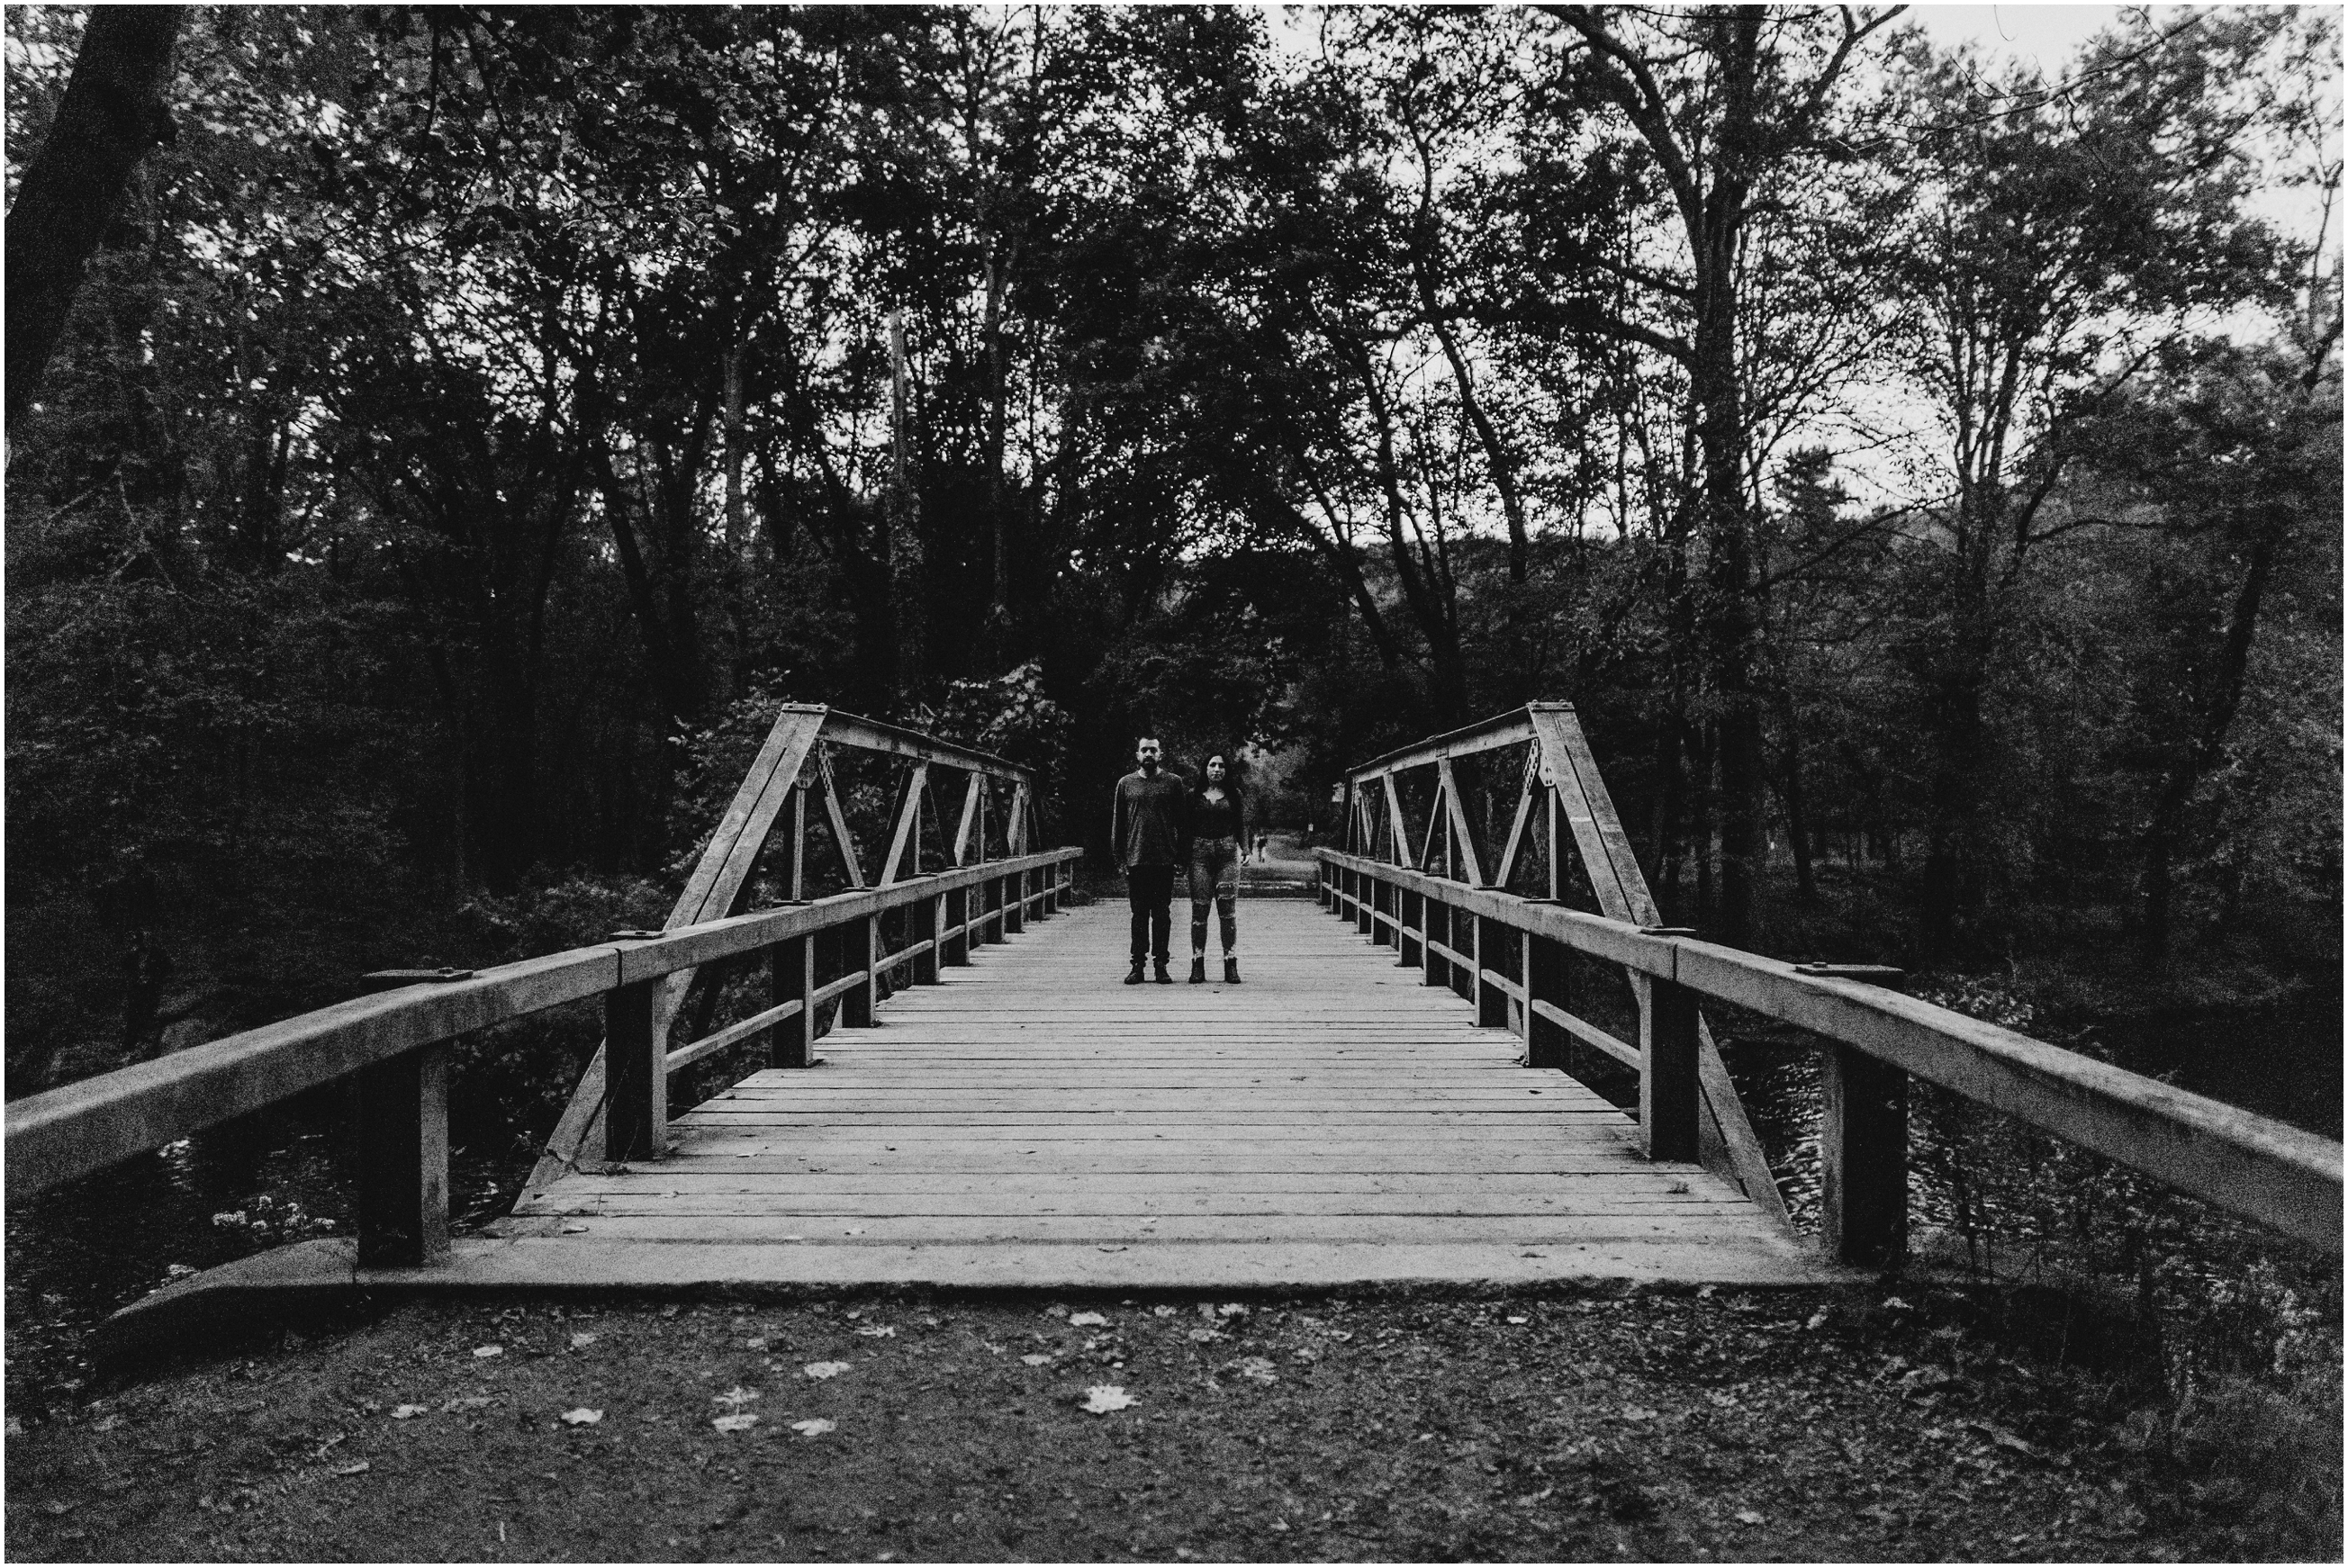 Secor Farms Pumpkin Patch Ramapo Reservation Fall Engagement Session New Jersey NJ Wedding Photographer